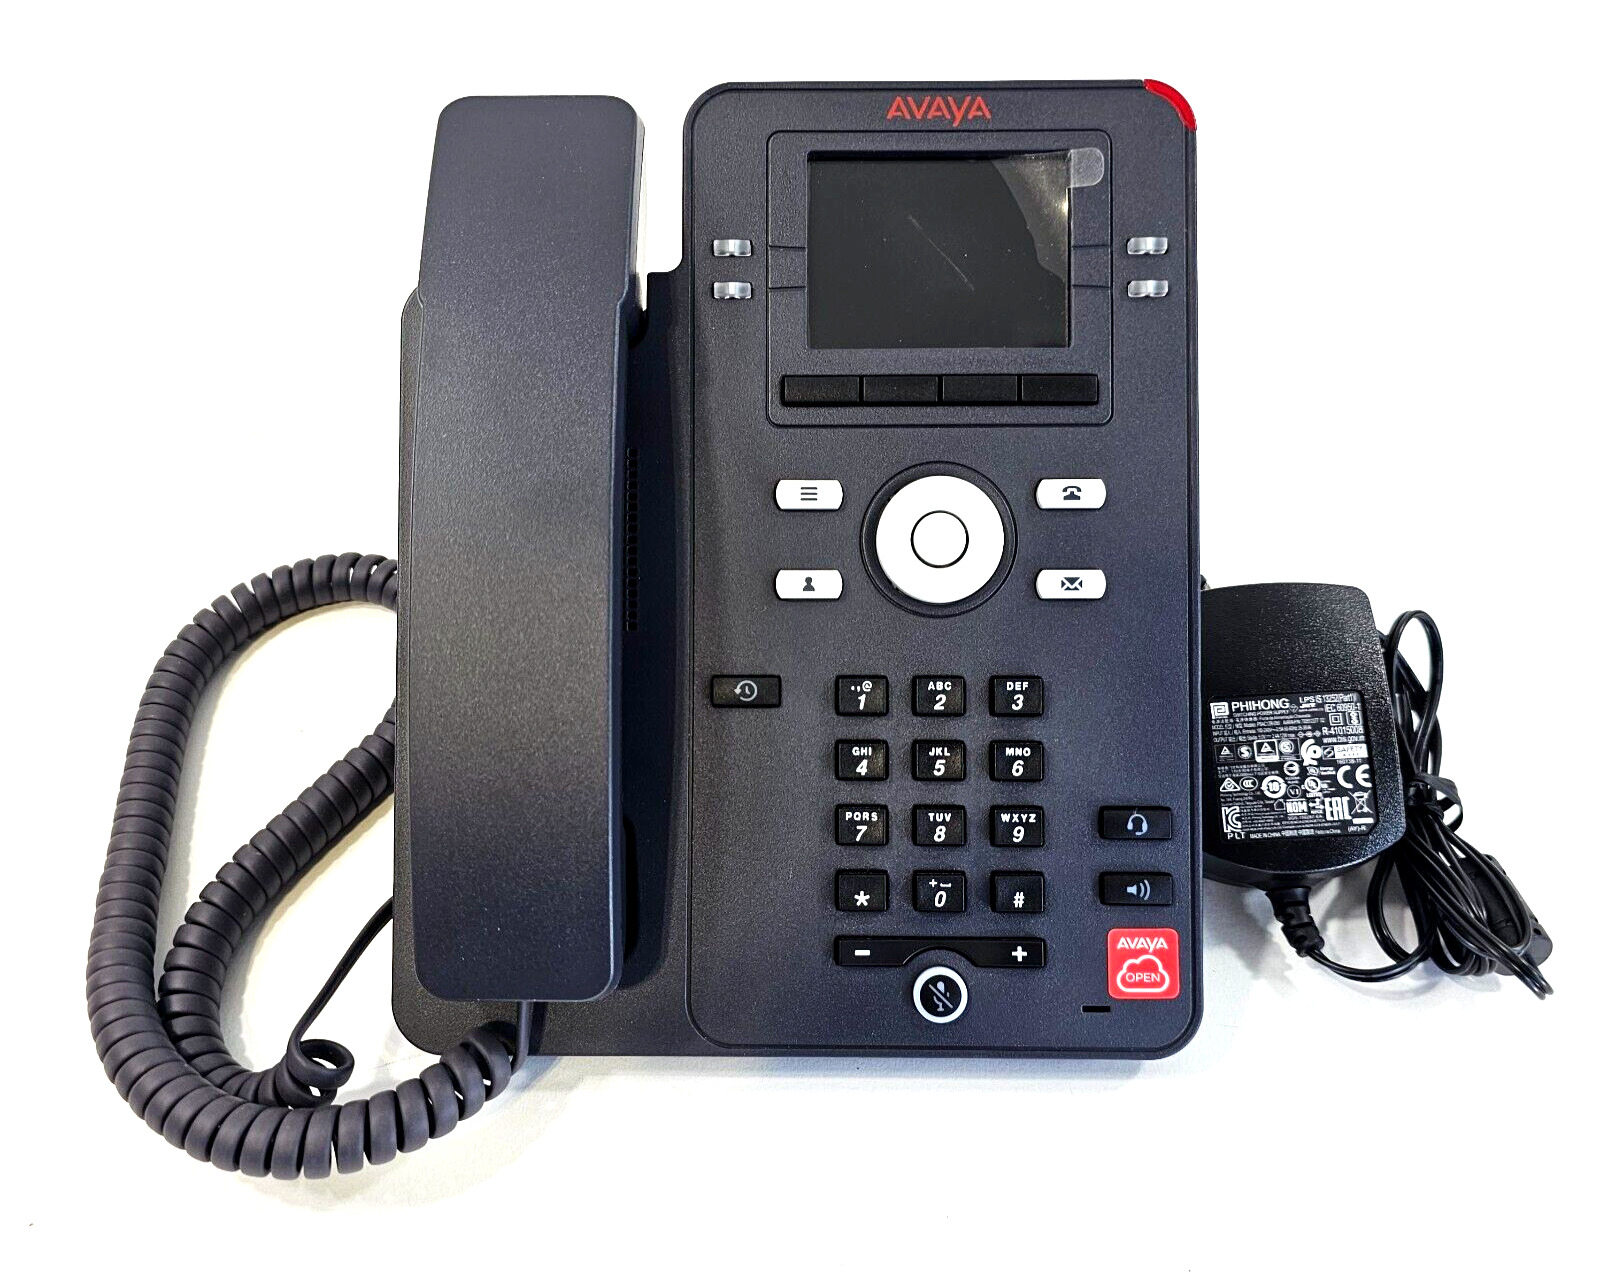 Avaya J139 VoIP 4-Line Business Phone 700513917 with AC Adapter - Tested